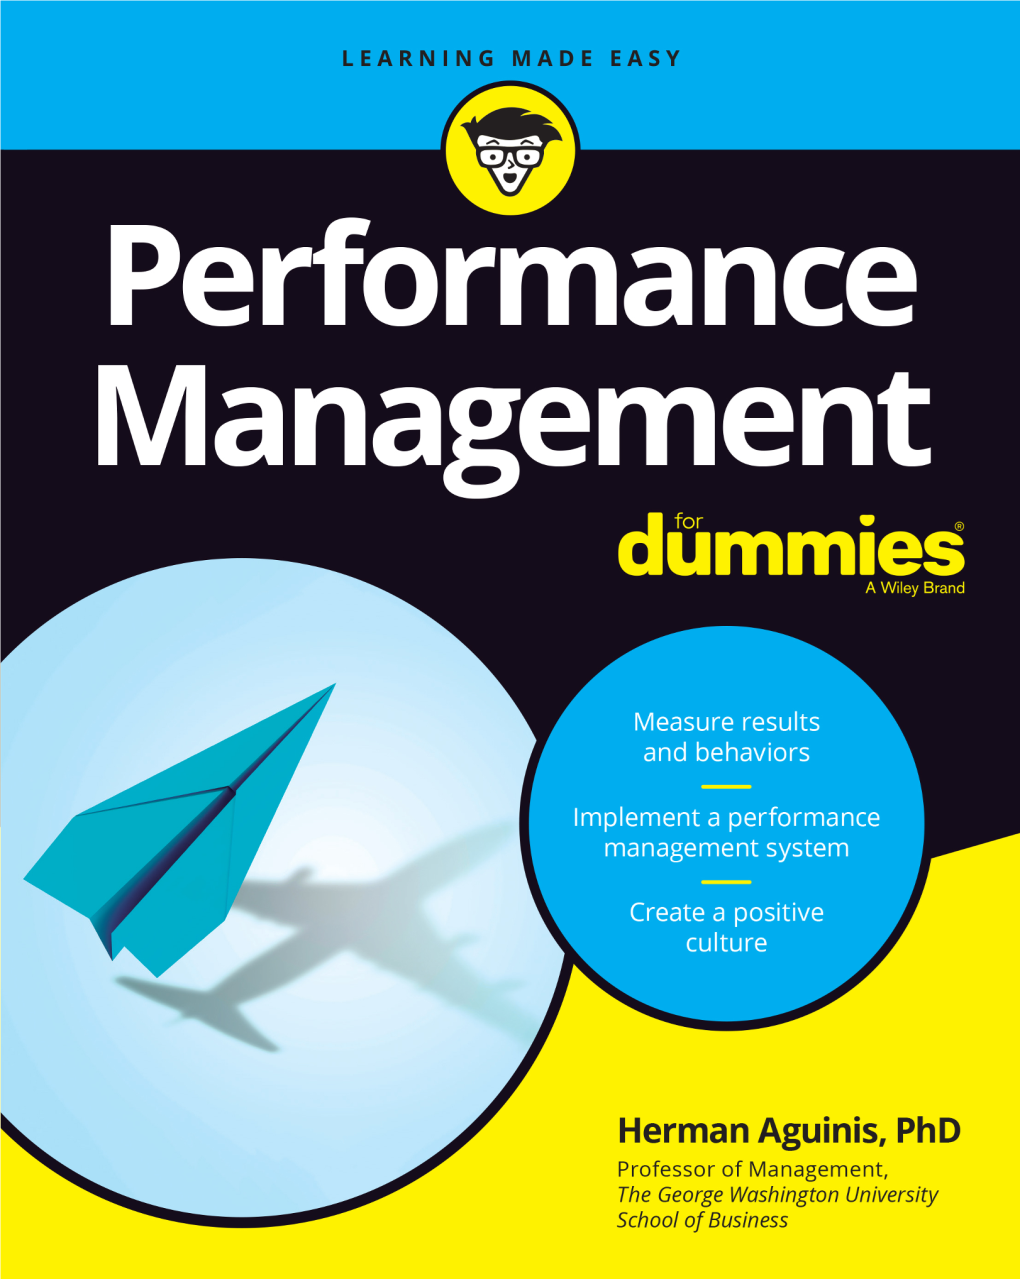 Performance Management for Dummies® Published By: John Wiley & Sons, Inc., 111 River Street, Hoboken, NJ 07030-5774